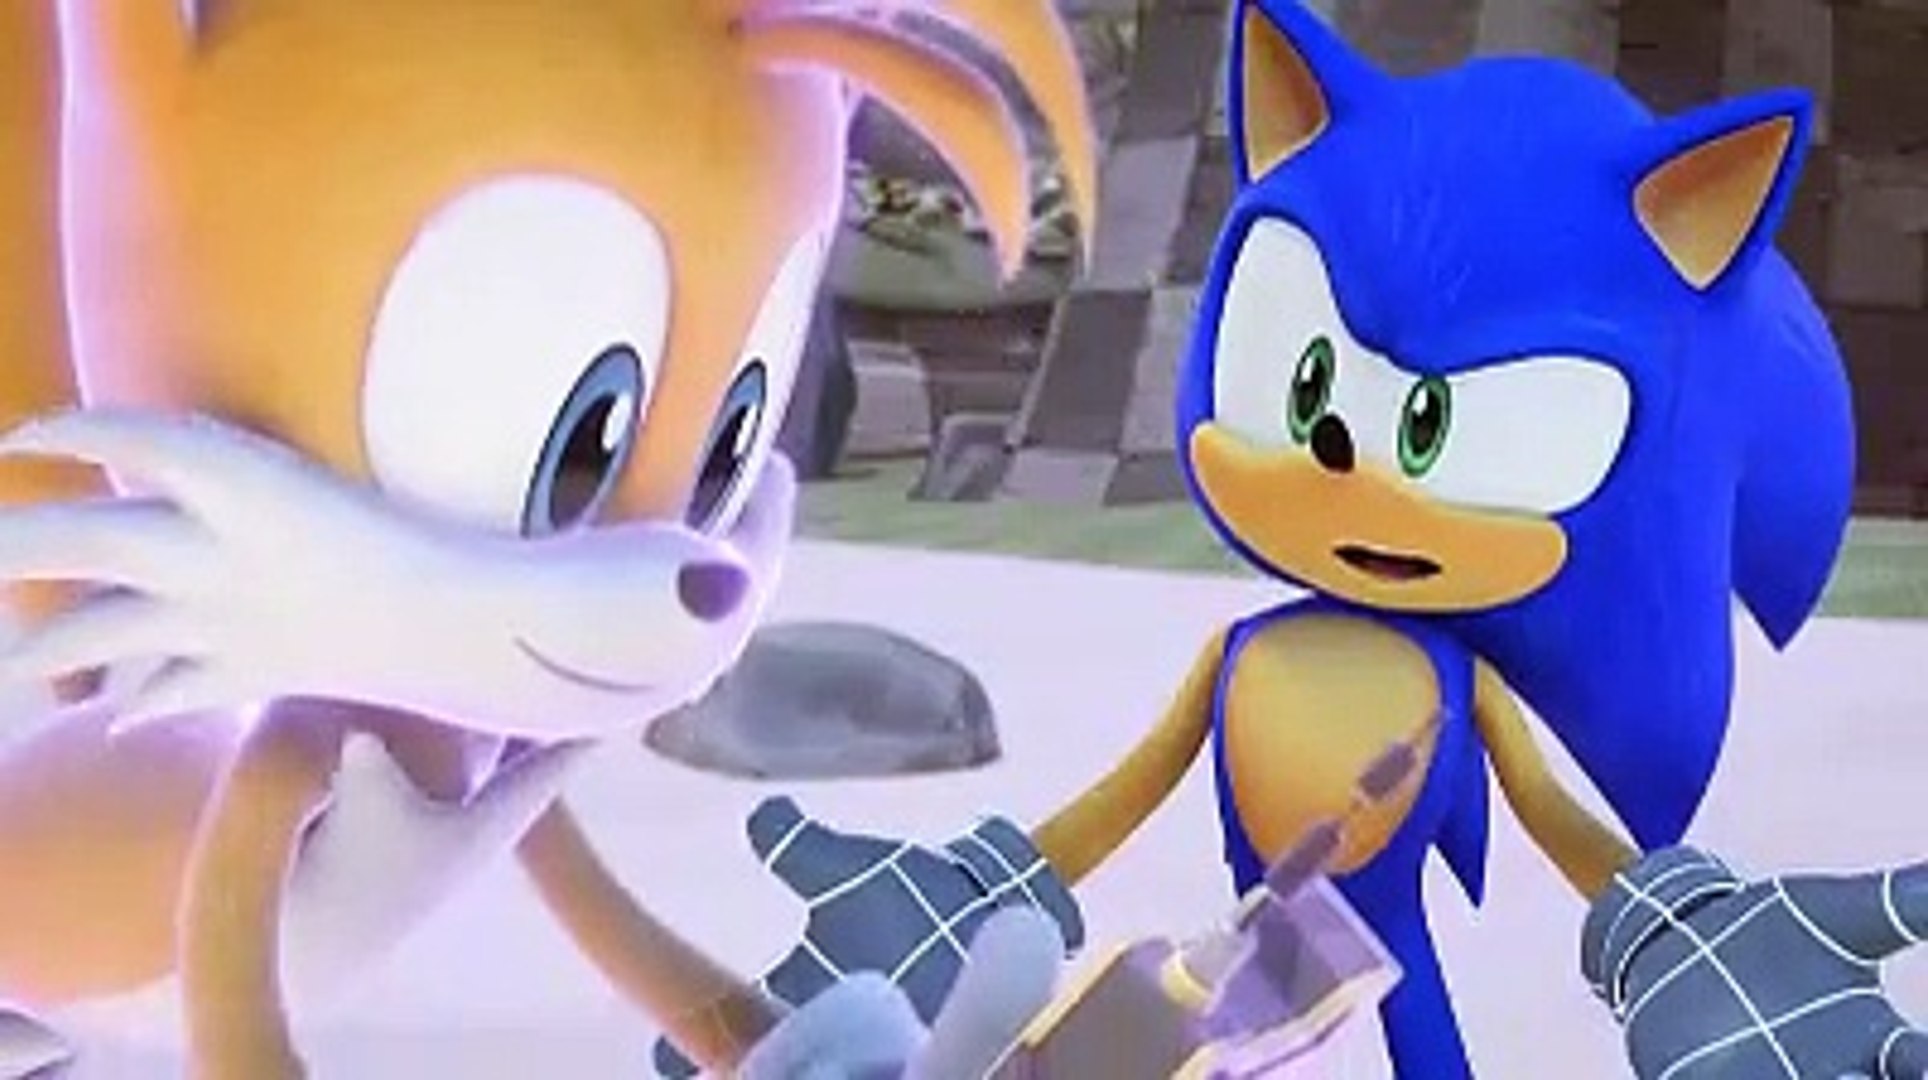 Bun on X: OH SNAP THE FIRST EPISODE OF SONIC PRIME SEASON 2 JUST DROPPED  ON ACCIDENT WATCH IT BEFORE IT GETS TAKEN DOWN  / X